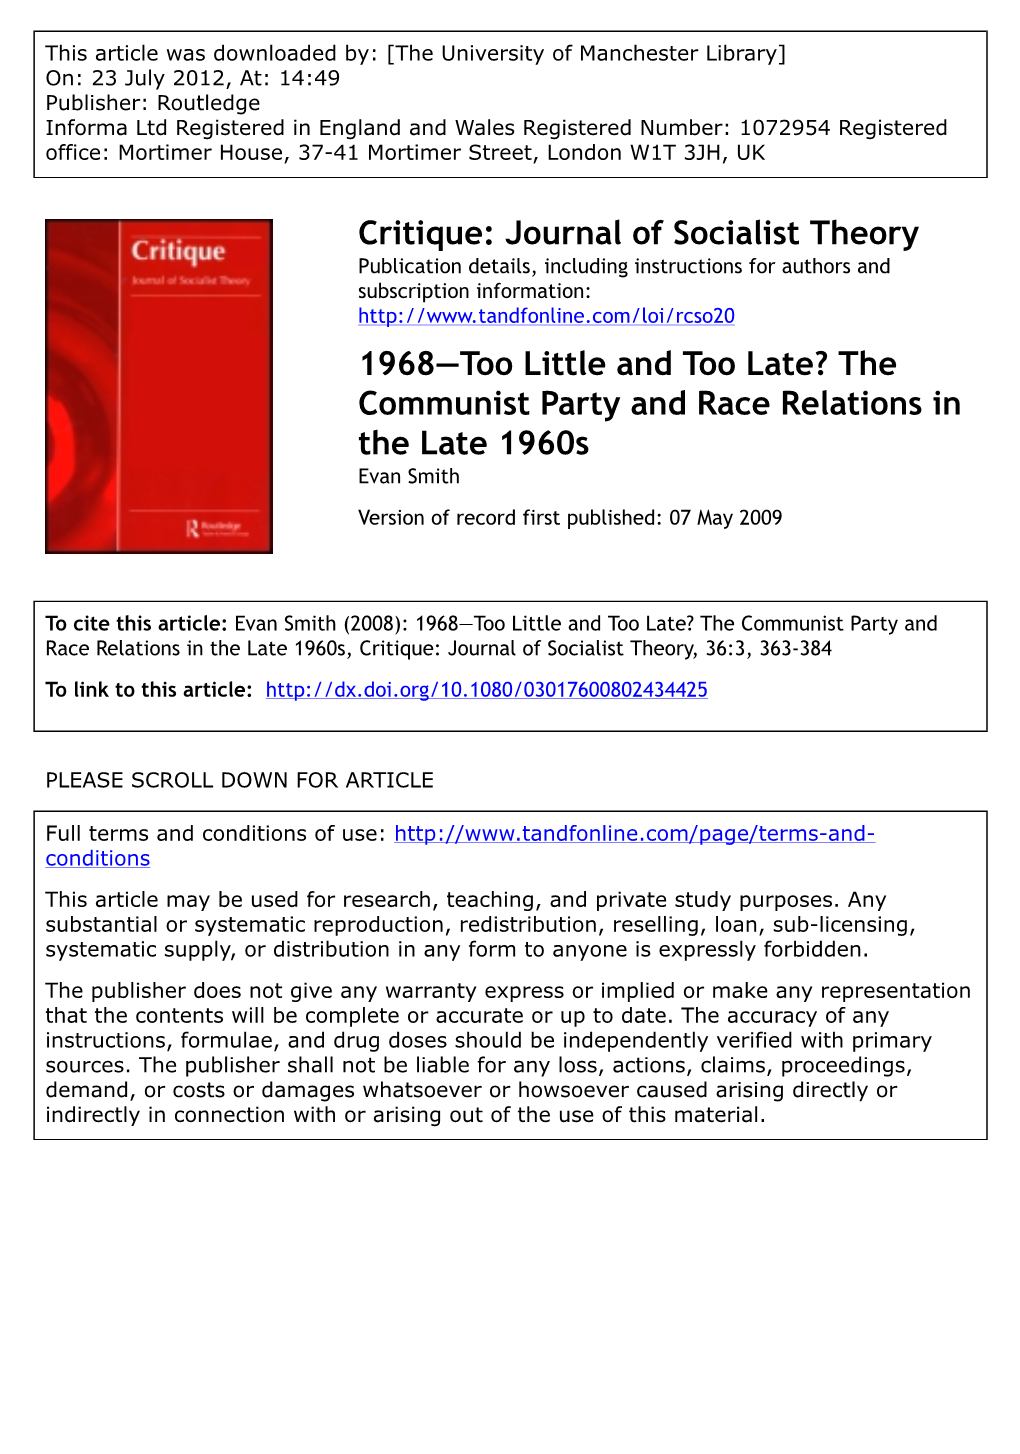 The Communist Party and Race Relations in the Late 1960S Evan Smith Version of Record First Published: 07 May 2009